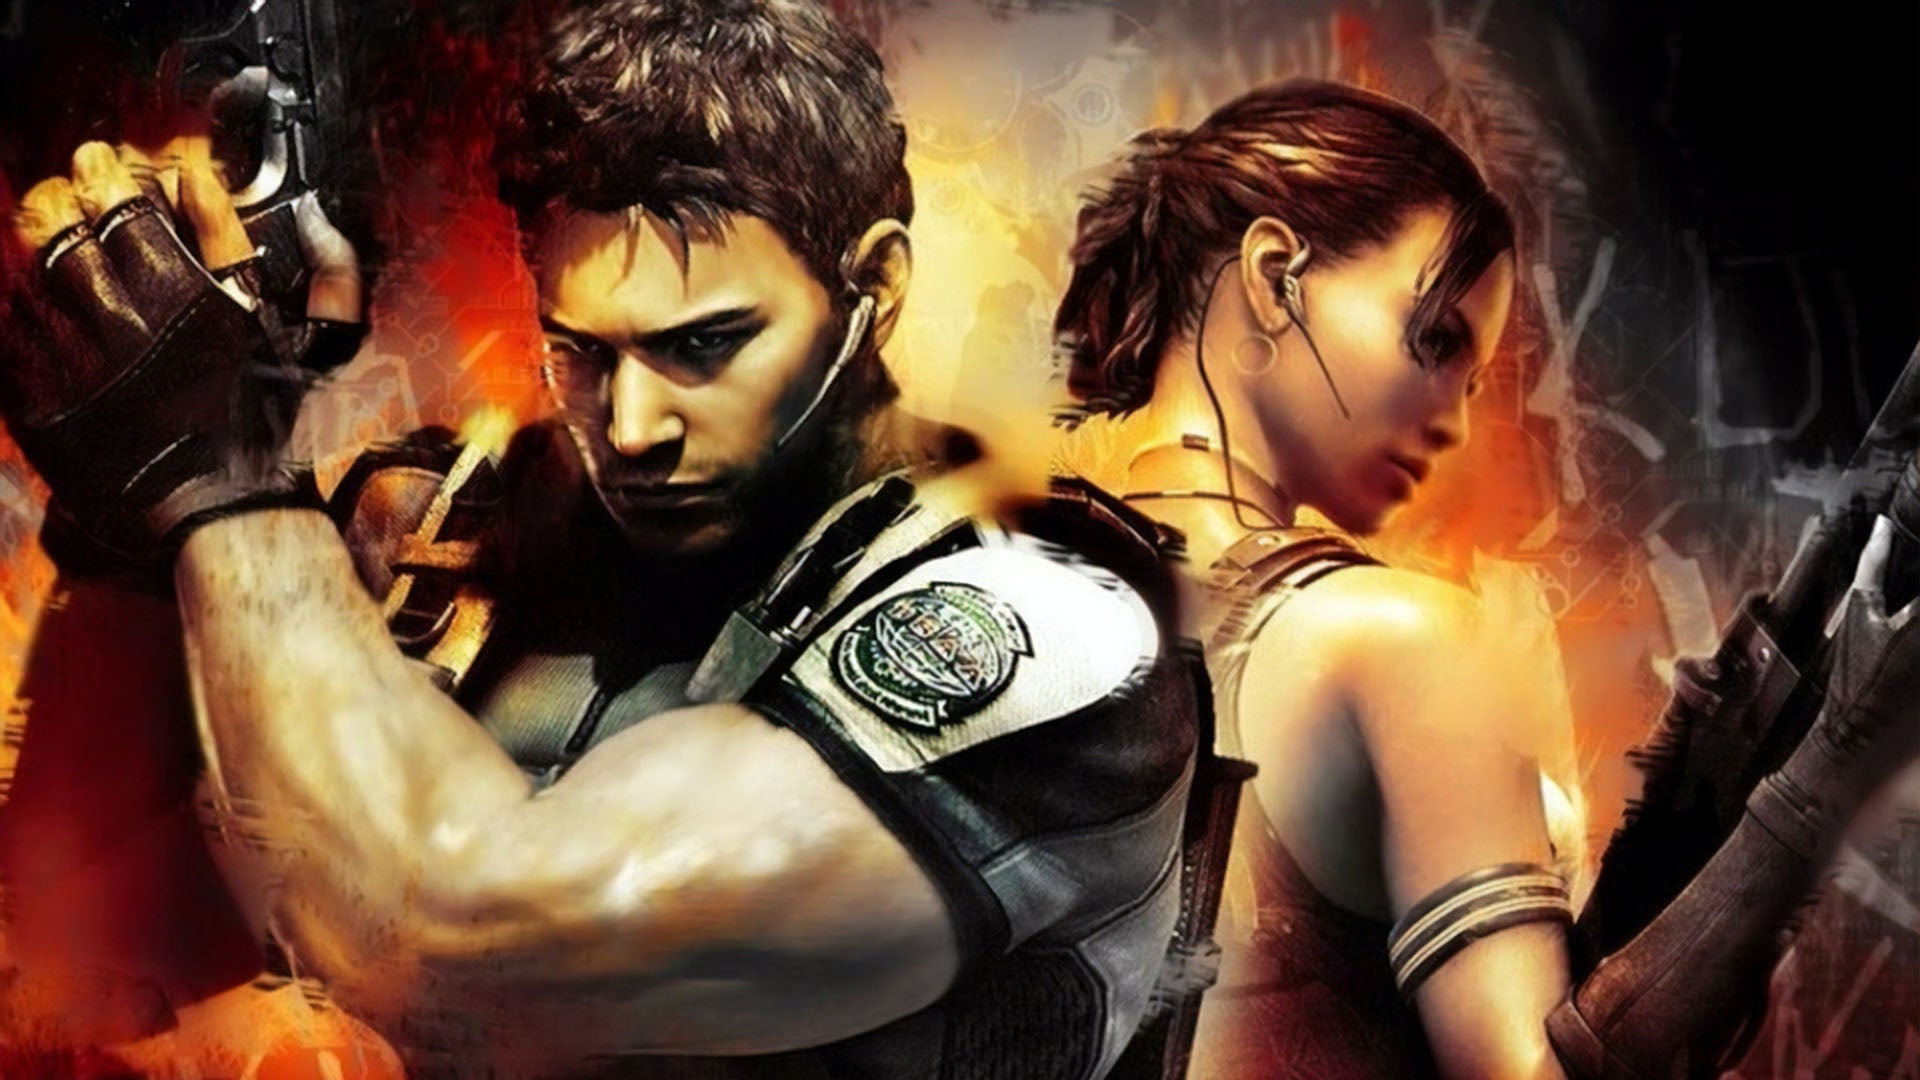 Image for Resident Evil 5 + Resi 6 On Nintendo Switch! Demo Graphics Comparisons + Performance Testing!